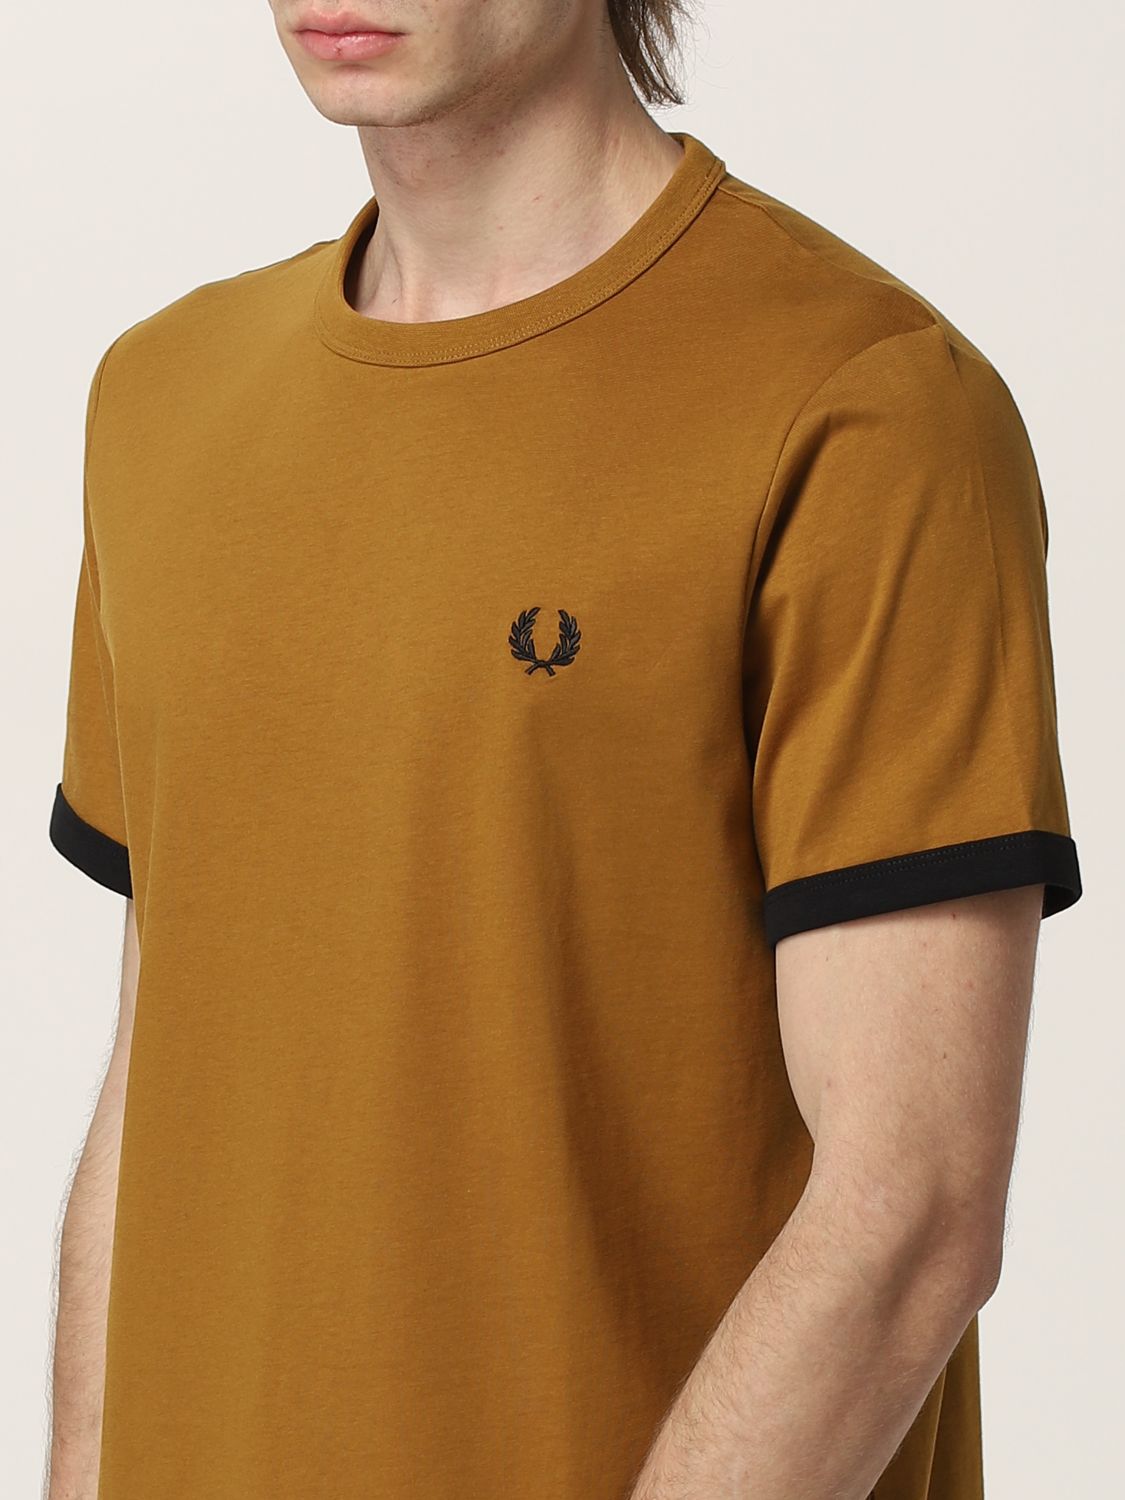 Tシャツ Fred Perry: Tシャツ メンズ Fred Perry レザー 3